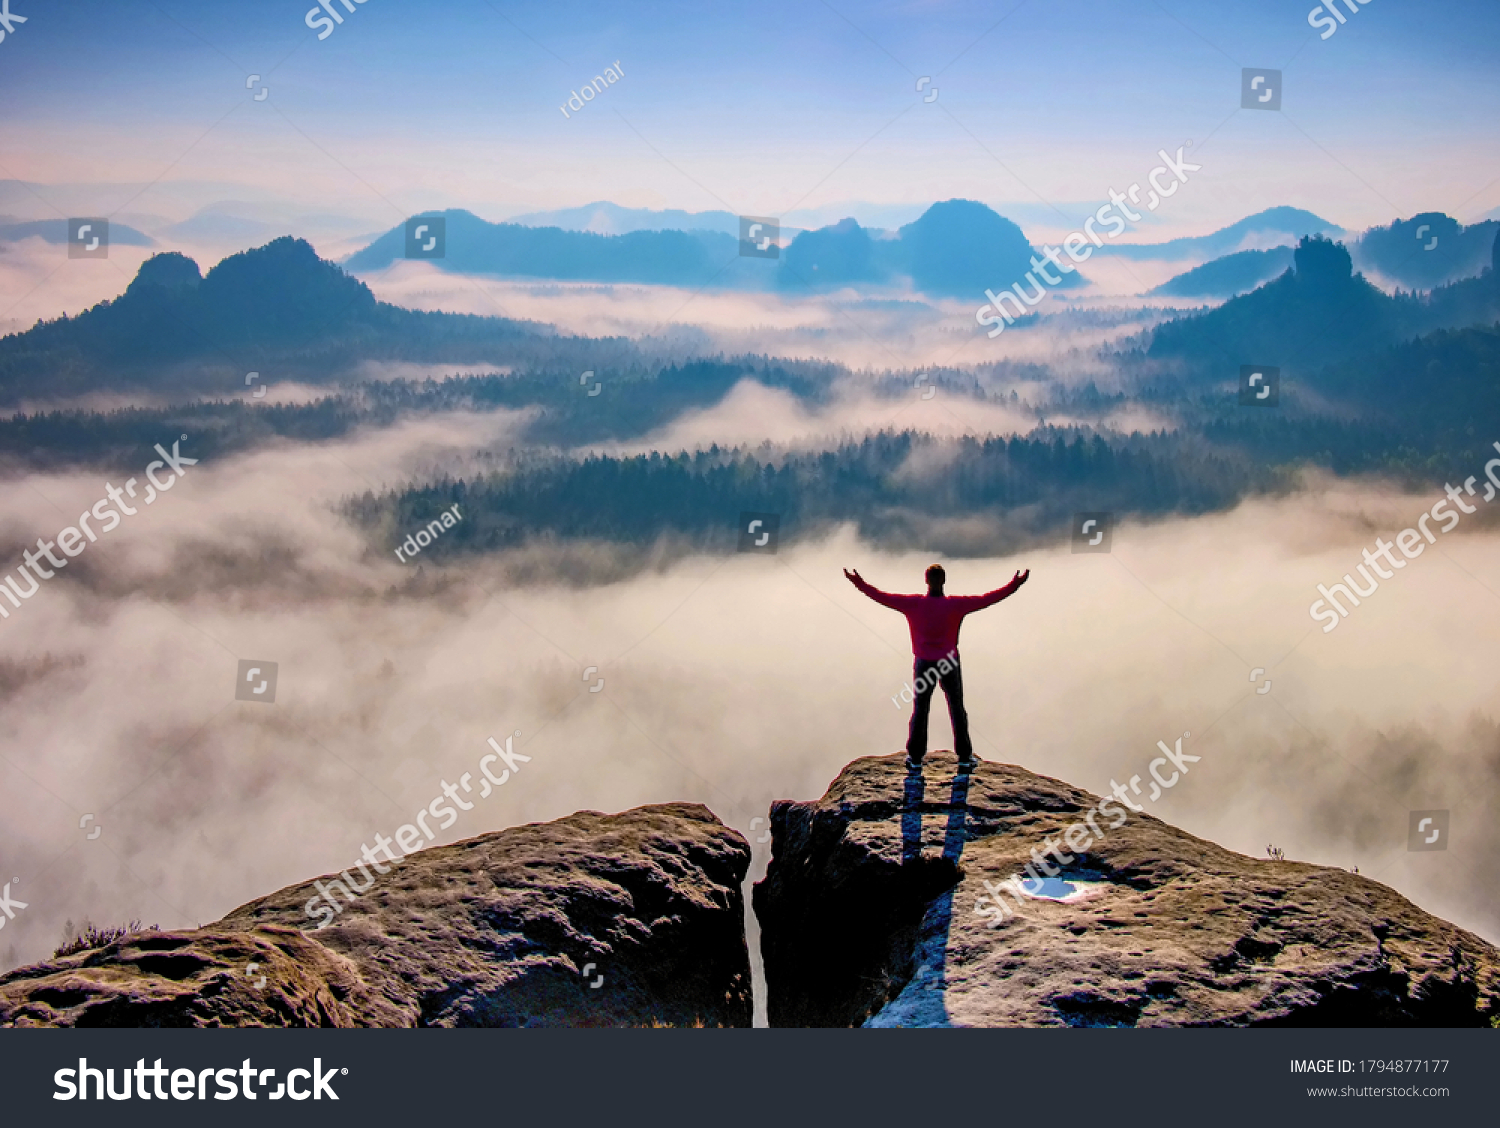 Small silhouette of hiker man enjoying beautiful sunrise in morning mountains. Traveler with raised hands standing on mountain with white fog below. #1794877177